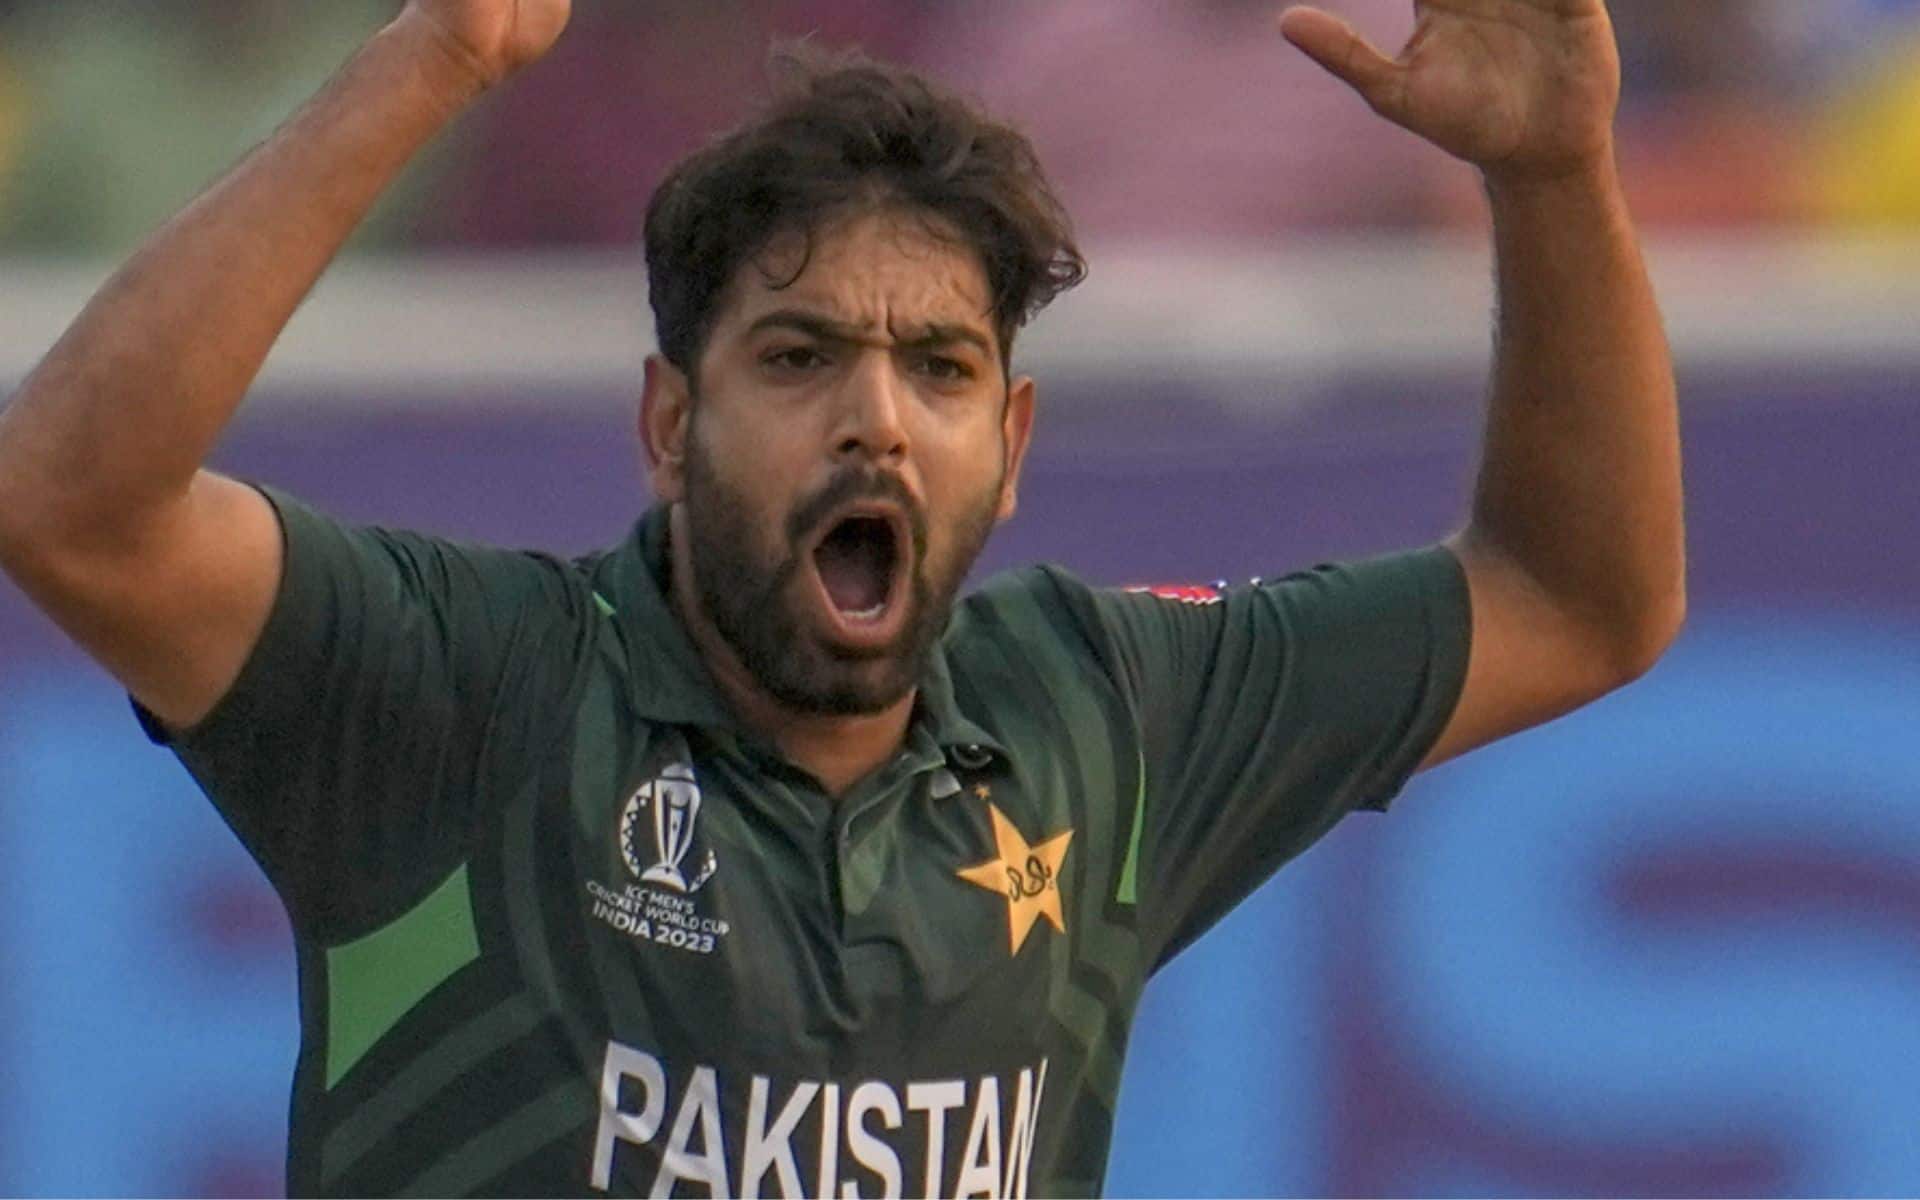 Haris Rauf faced criticism after massive fight with fan (x)